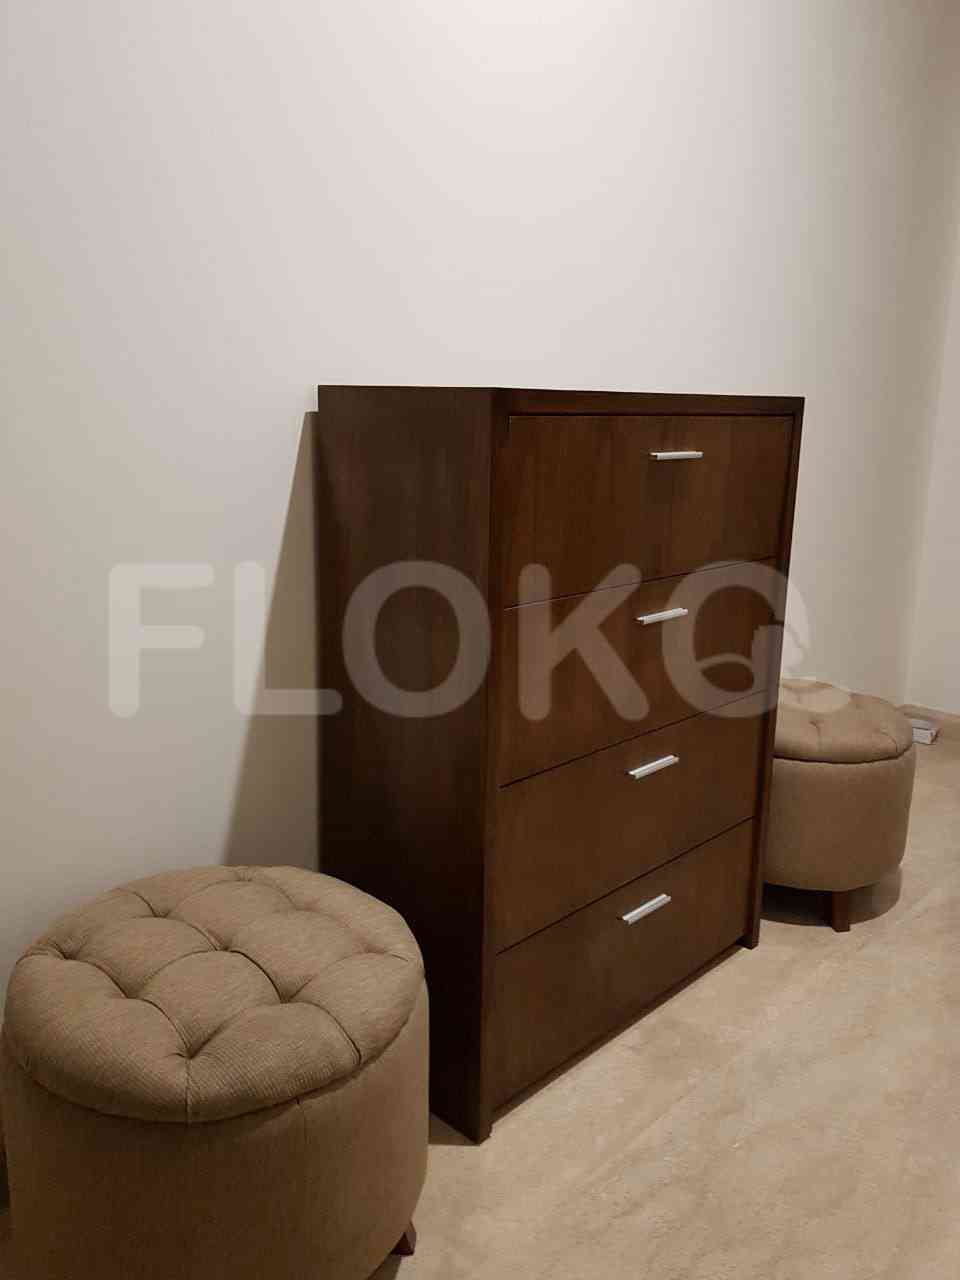 2 Bedroom on 18th Floor for Rent in Pakubuwono Spring Apartment - fga4a1 9